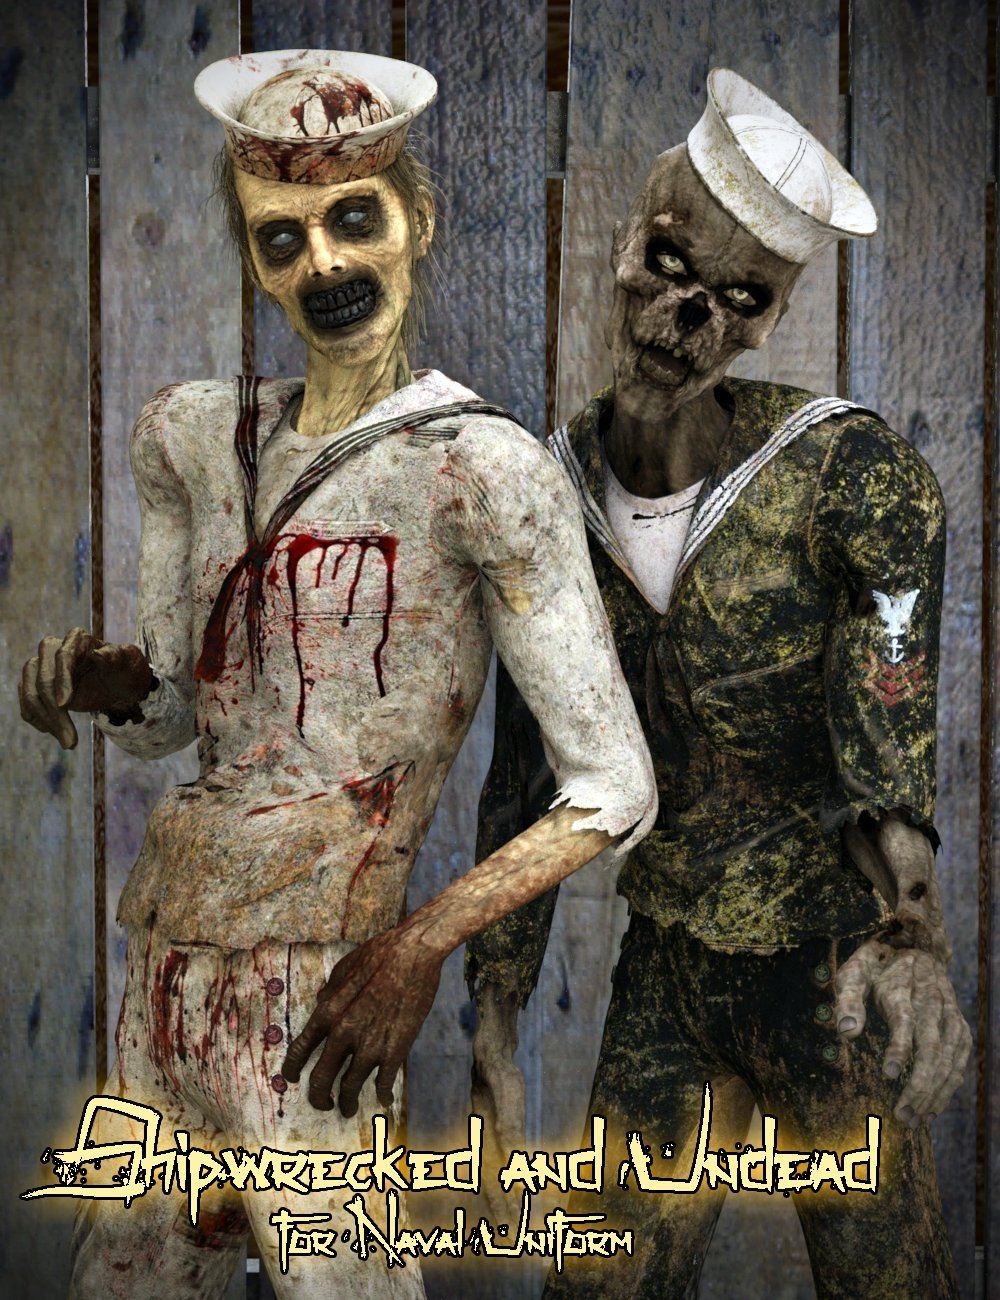 Shipwrecked and Undead for Naval Uniform_DAZ3D下载站